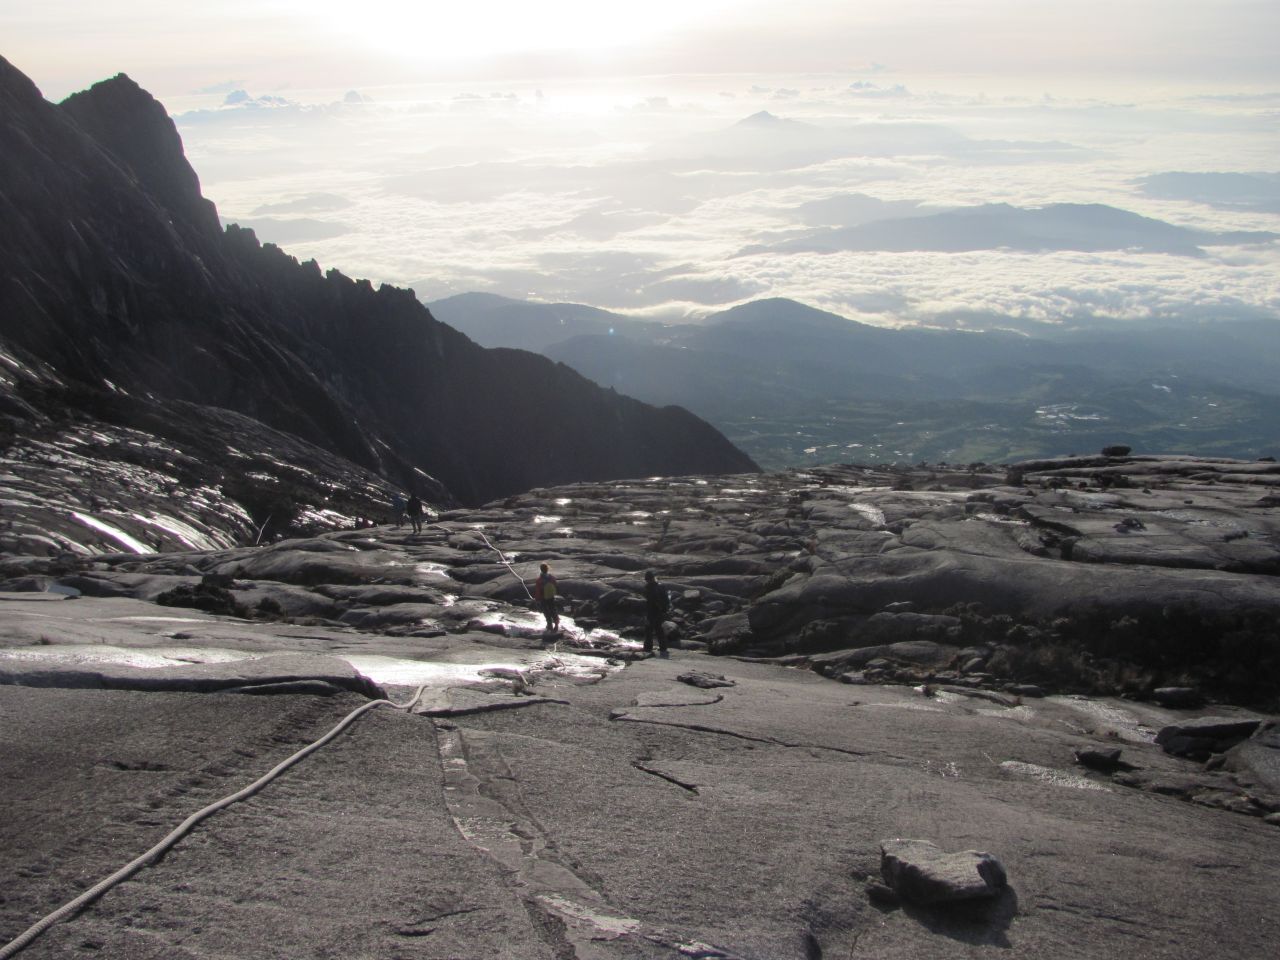 Malaysia's <a href="http://ireport.cnn.com/docs/DOC-1158703">Mount Kinabalu</a> lies within the confines of Kinabalu Park. The region's indigenous Kadazan and Dusun tribes believe <a href="http://www.mountkinabalu.com/mt-kinabalu/mt-kinabalu-introduction" target="_blank" target="_blank">spirits dwell </a>on top of its peak.